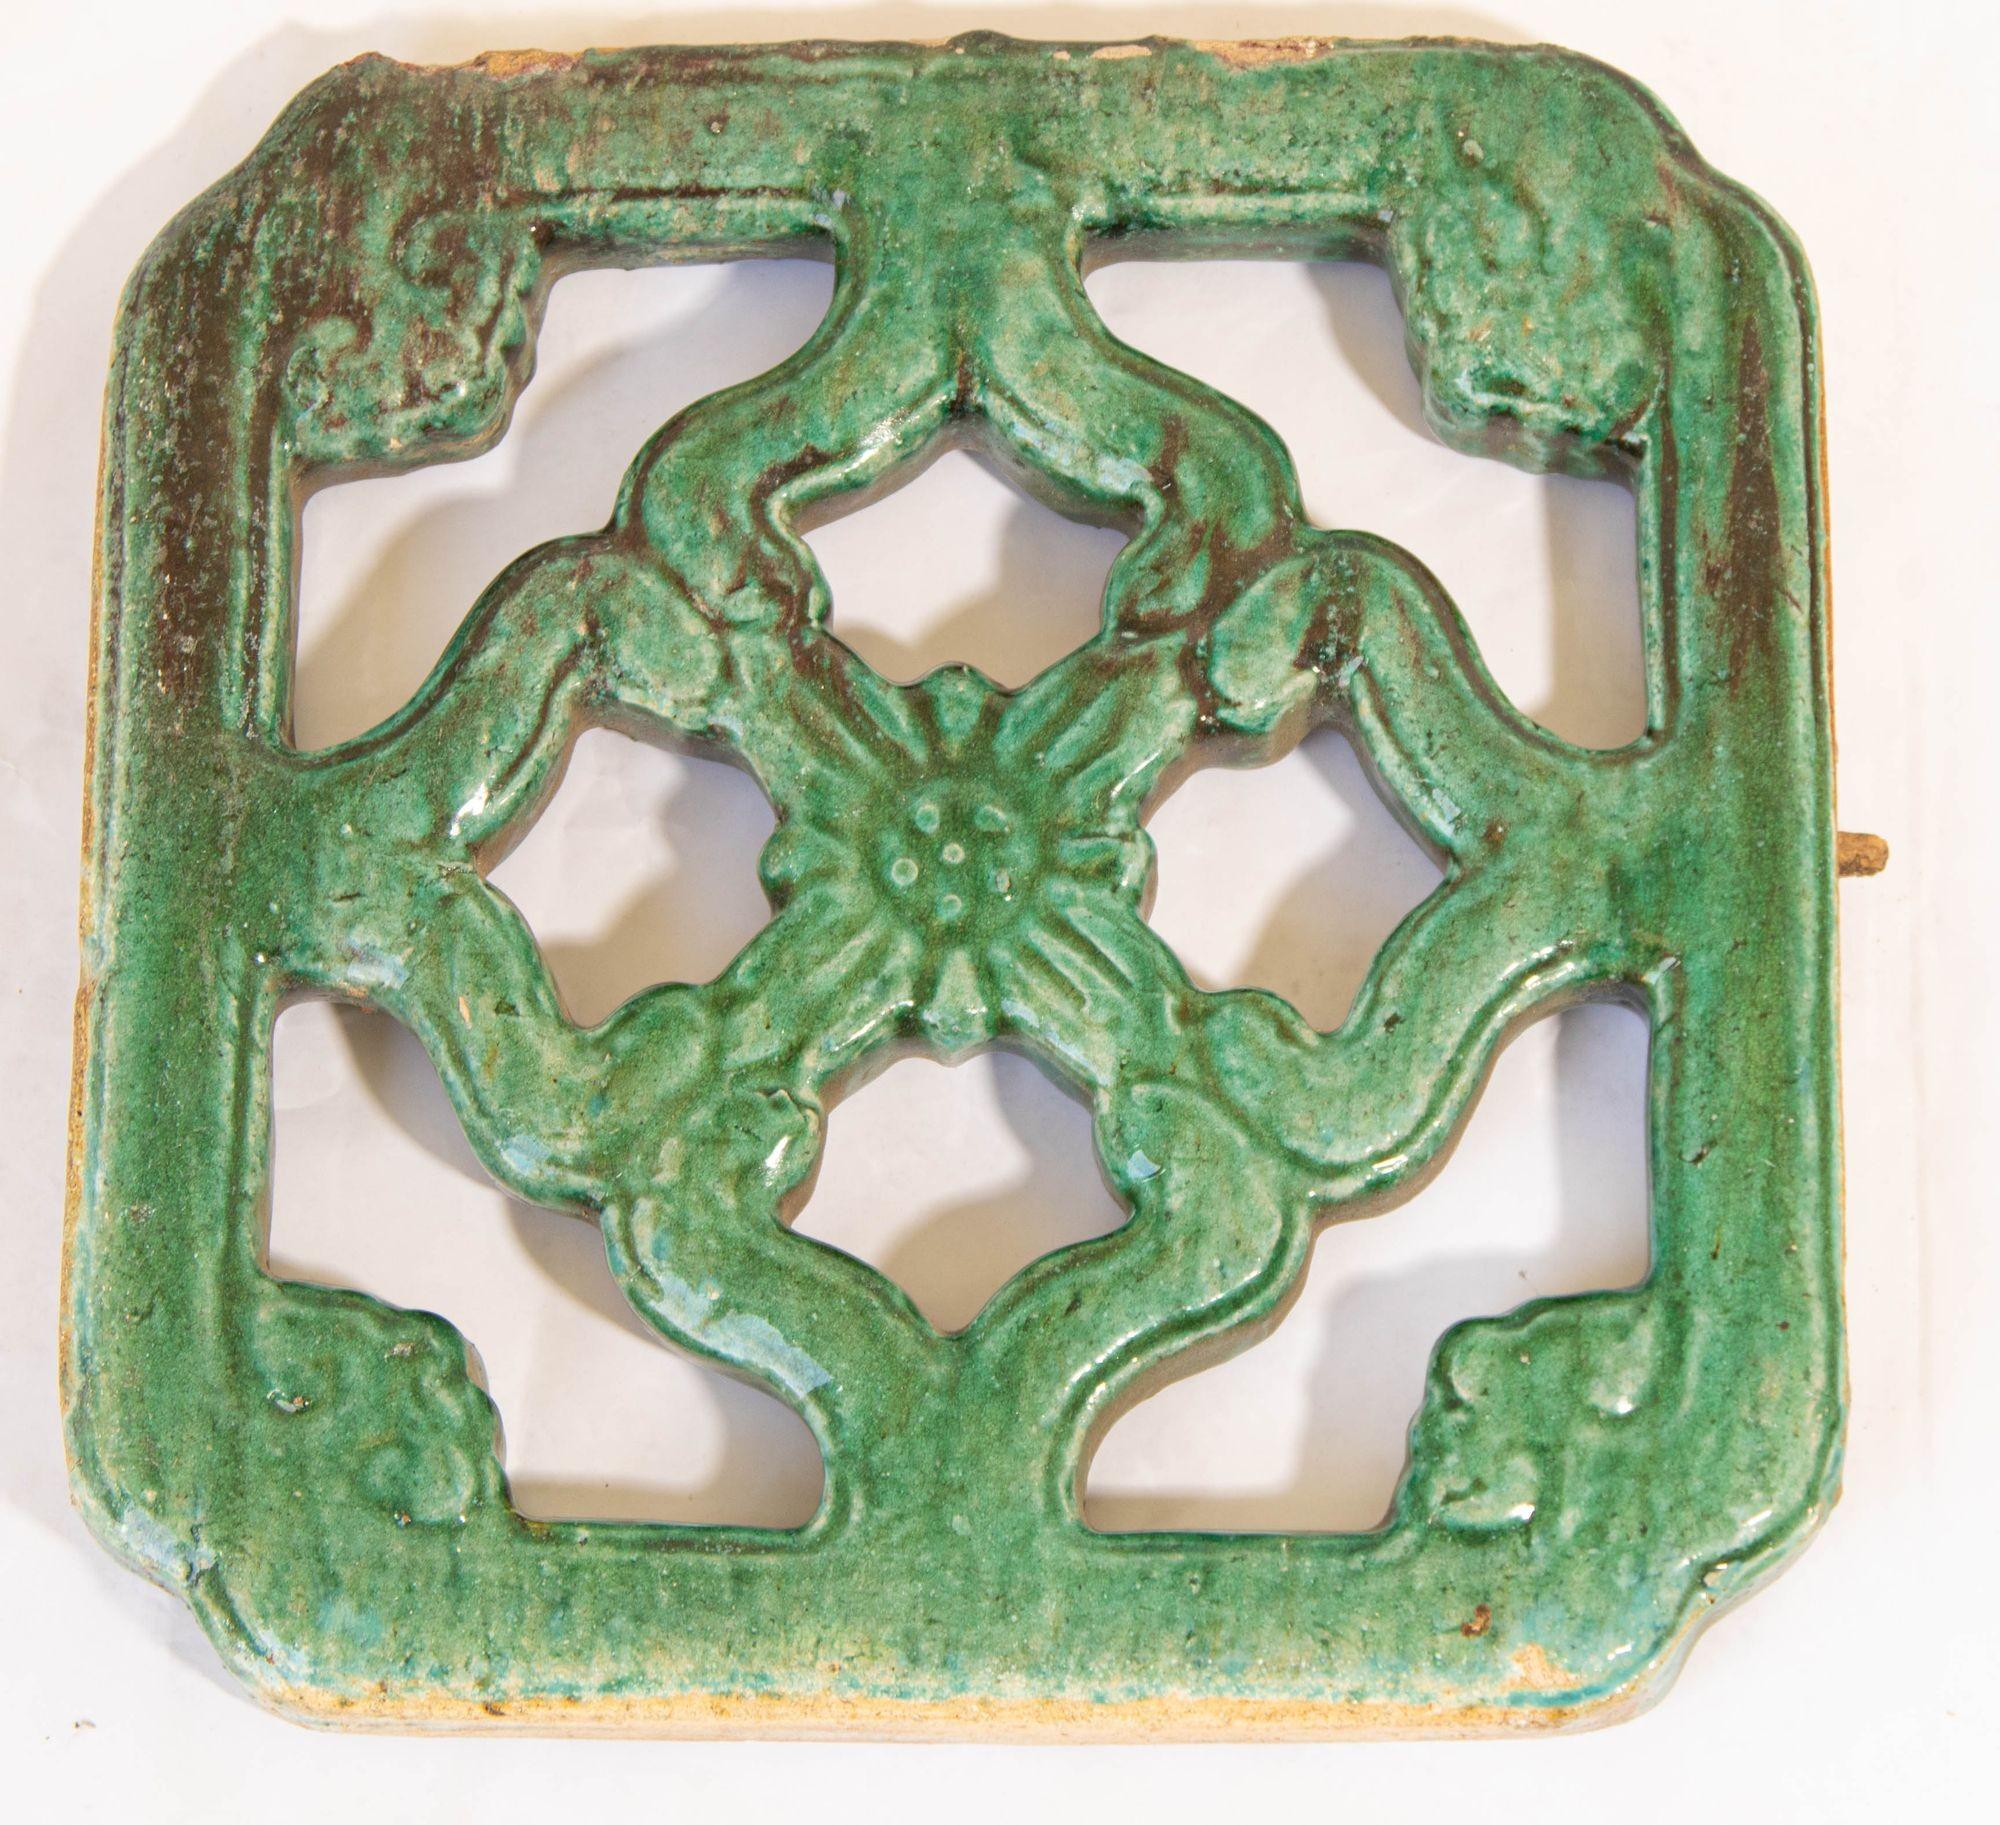 Antique Chinese Emerald Green Glazed Architectural Tile, circa 1900 Set of 2 In Fair Condition For Sale In North Hollywood, CA